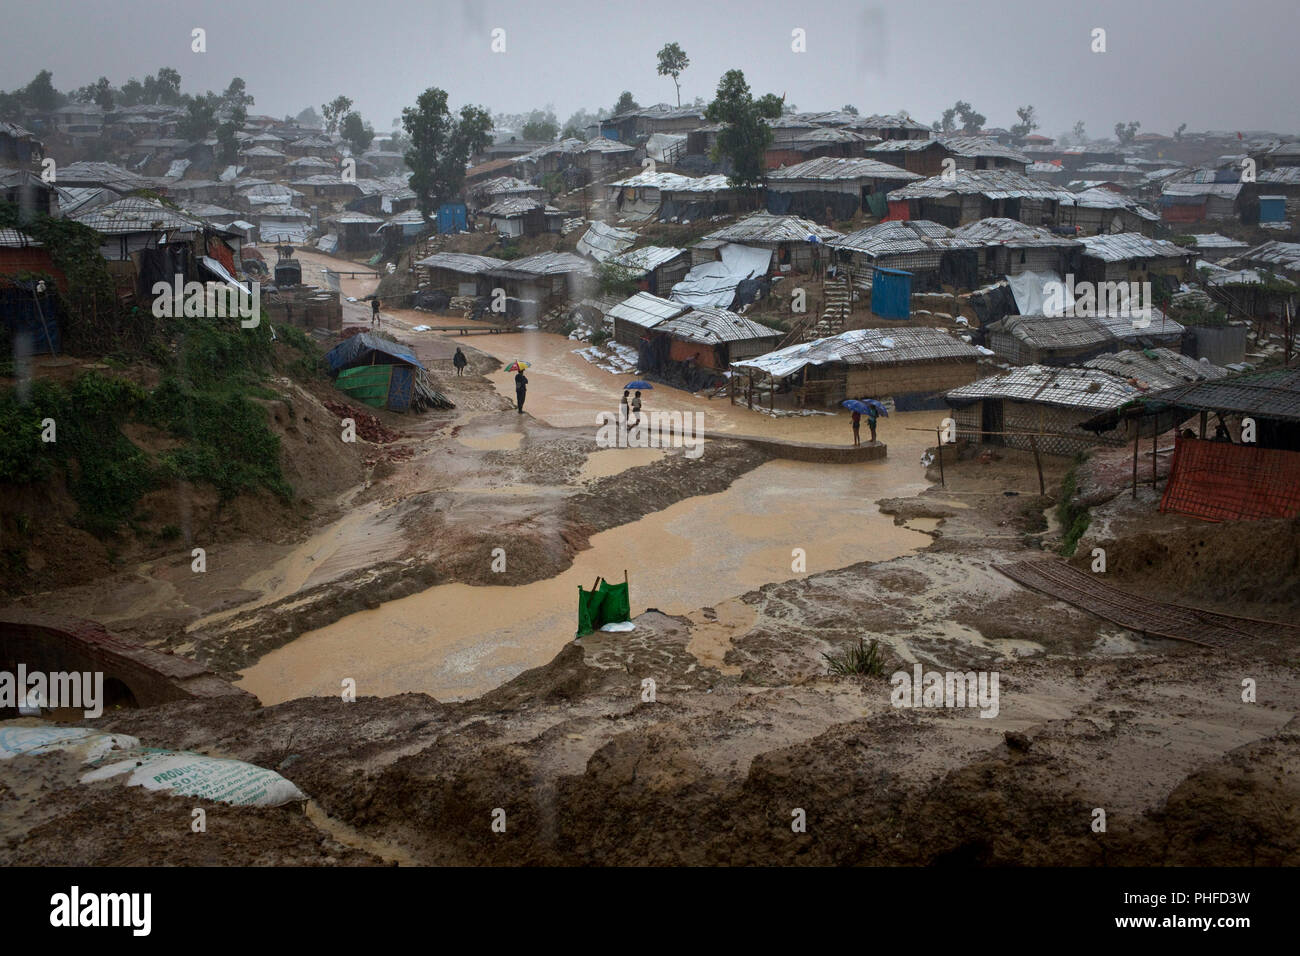 Rohingya refugees shield from the rain in Balukhali, Camp 10, part of the mega refugee camp sheltering over 800,000 Rohingya refugees, Cox's Bazar, Ba Stock Photo